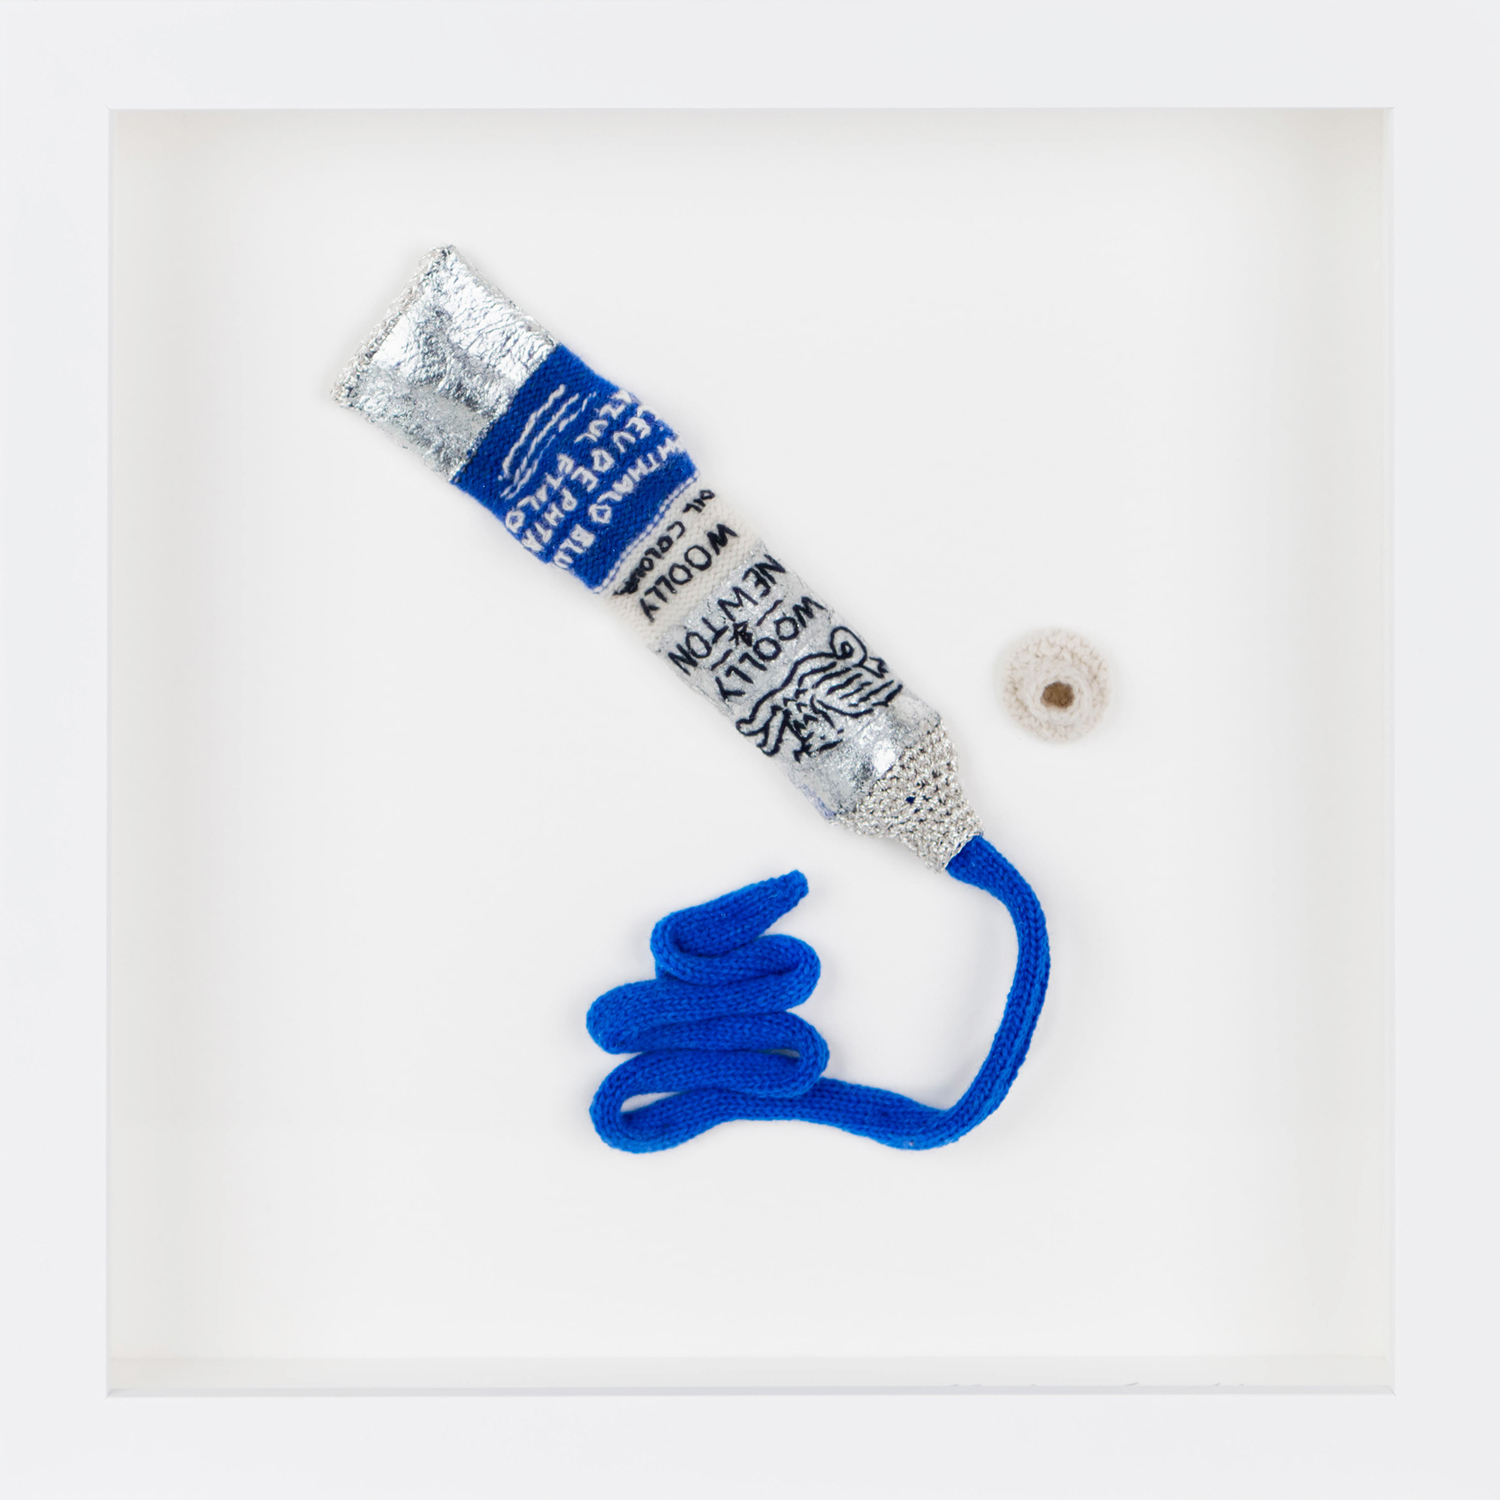 Phthalo Blue ‘Woolly & Newton’ limited edition knitted paint tube by Kate Jenkins